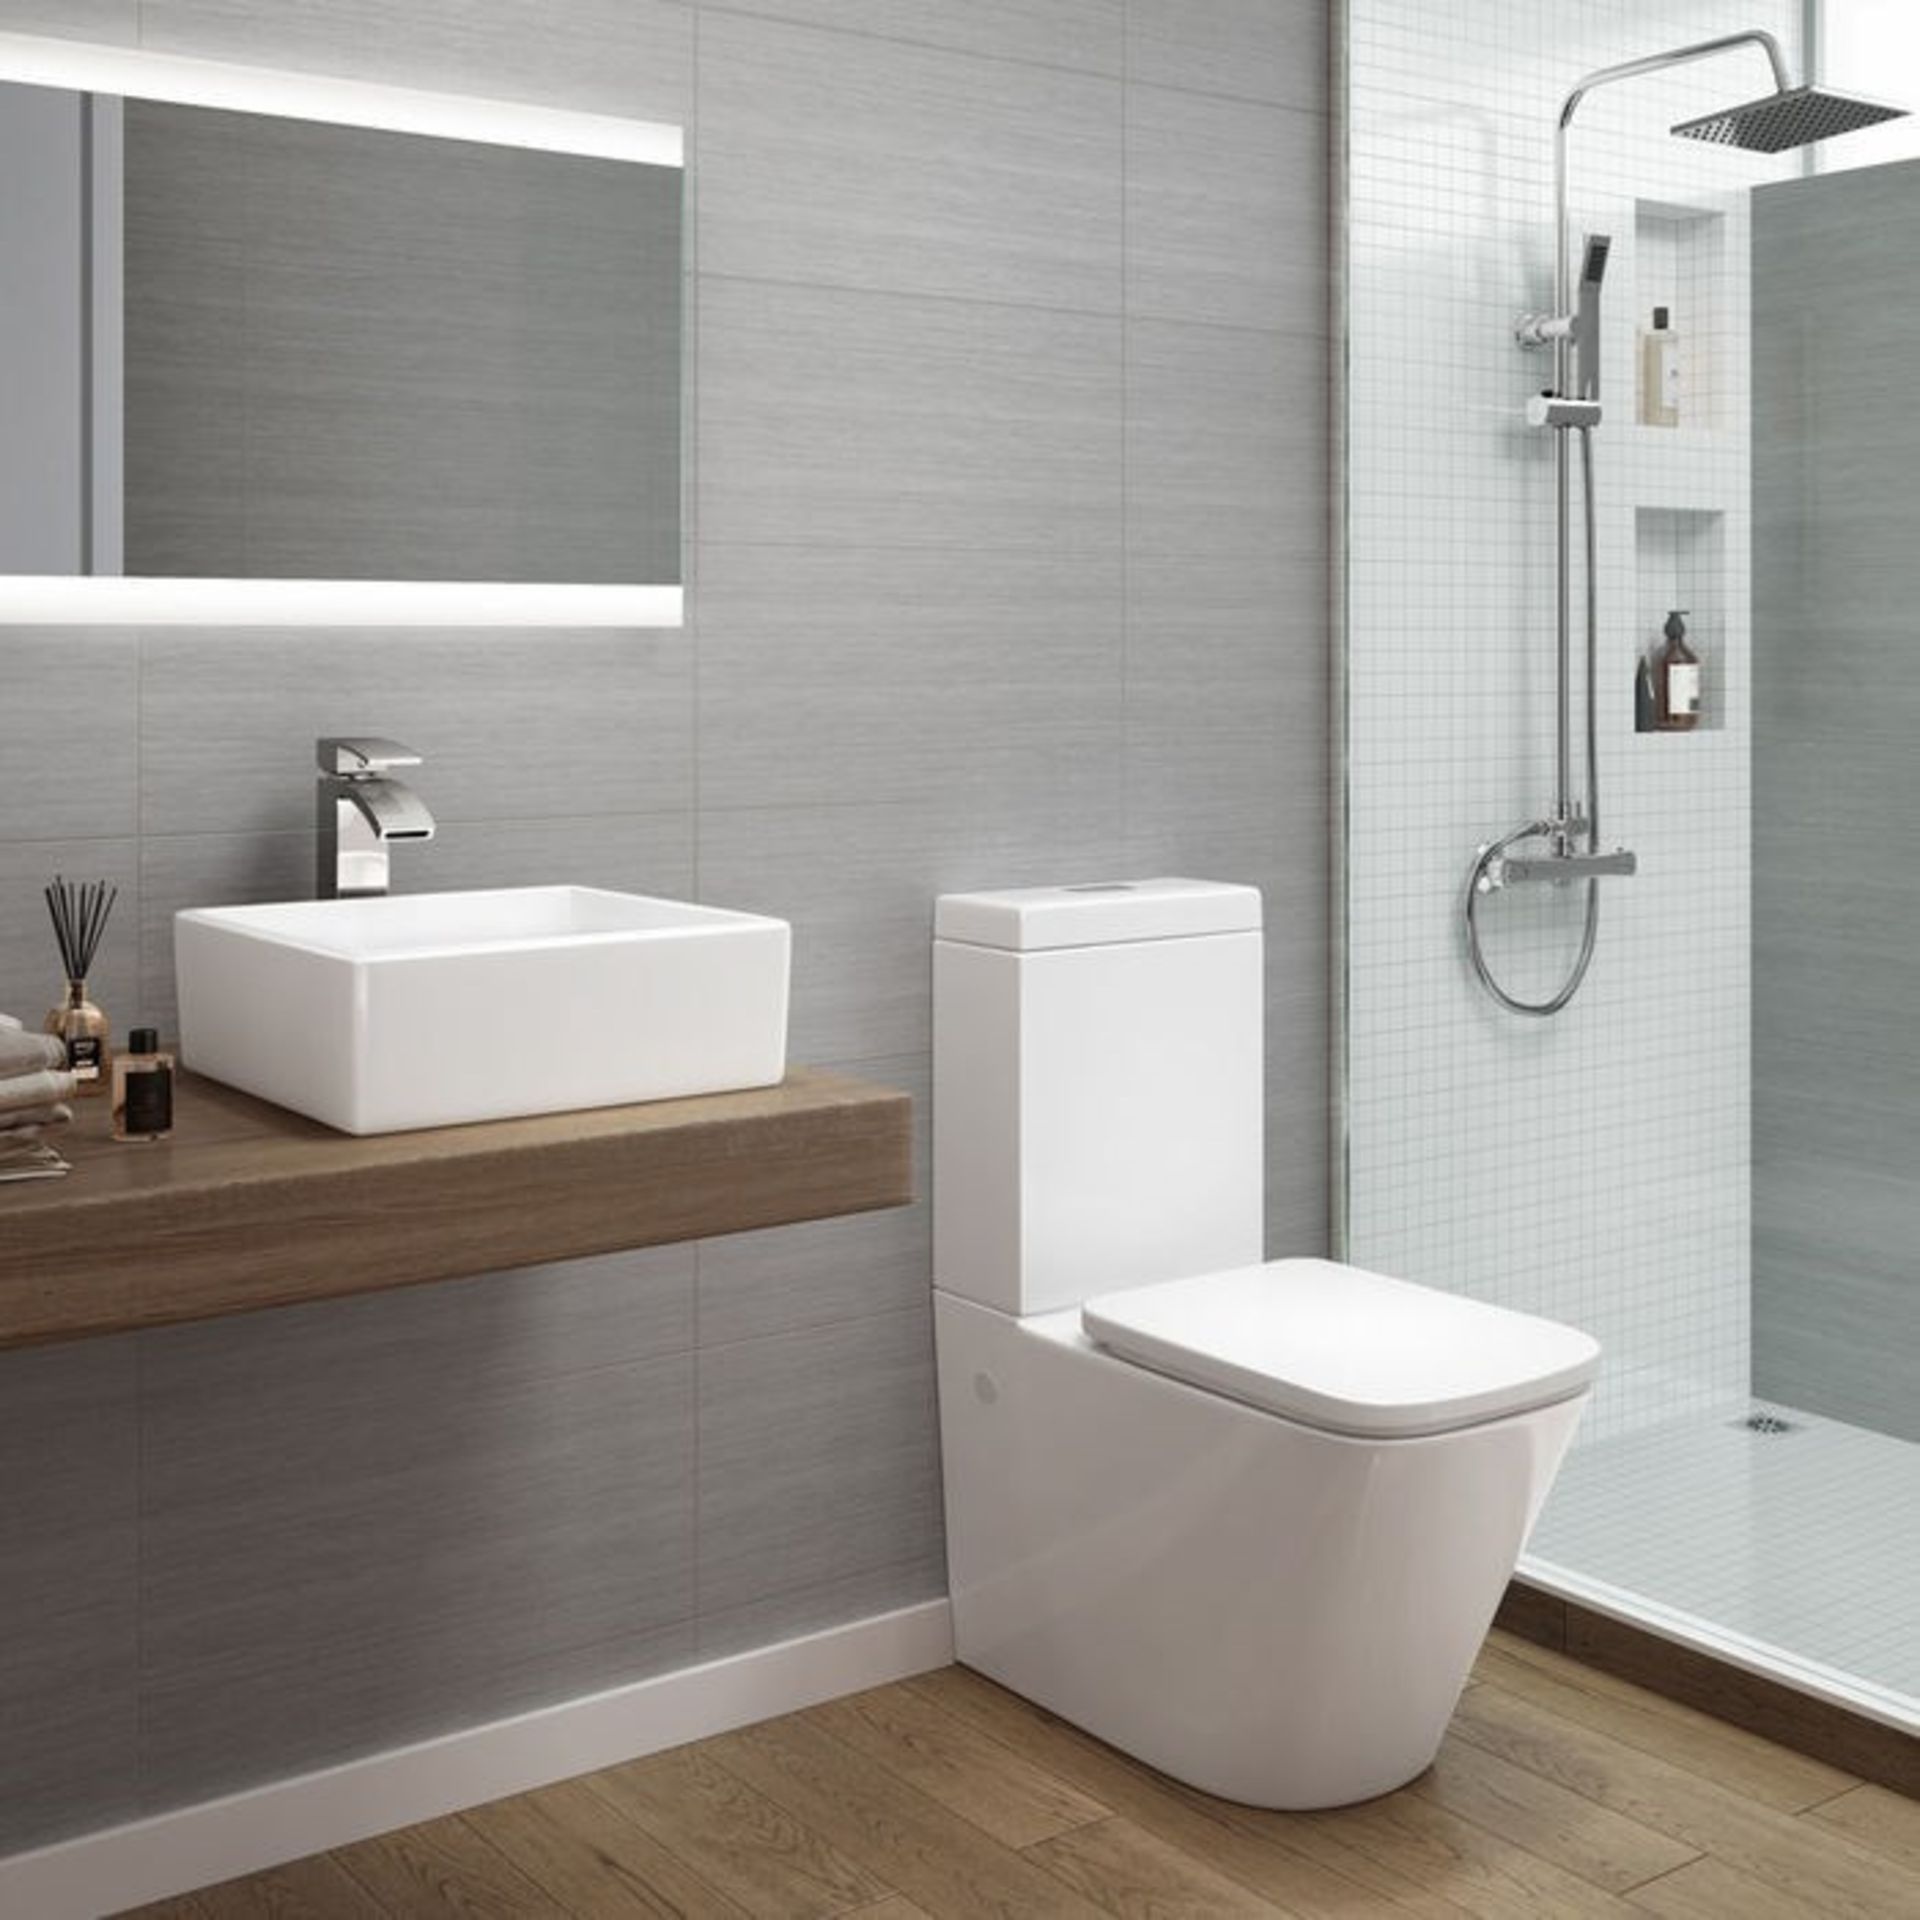 Florence Close Coupled Toilet & Cistern inc Soft Close Seat. Contemporary design finished in a... - Image 2 of 3